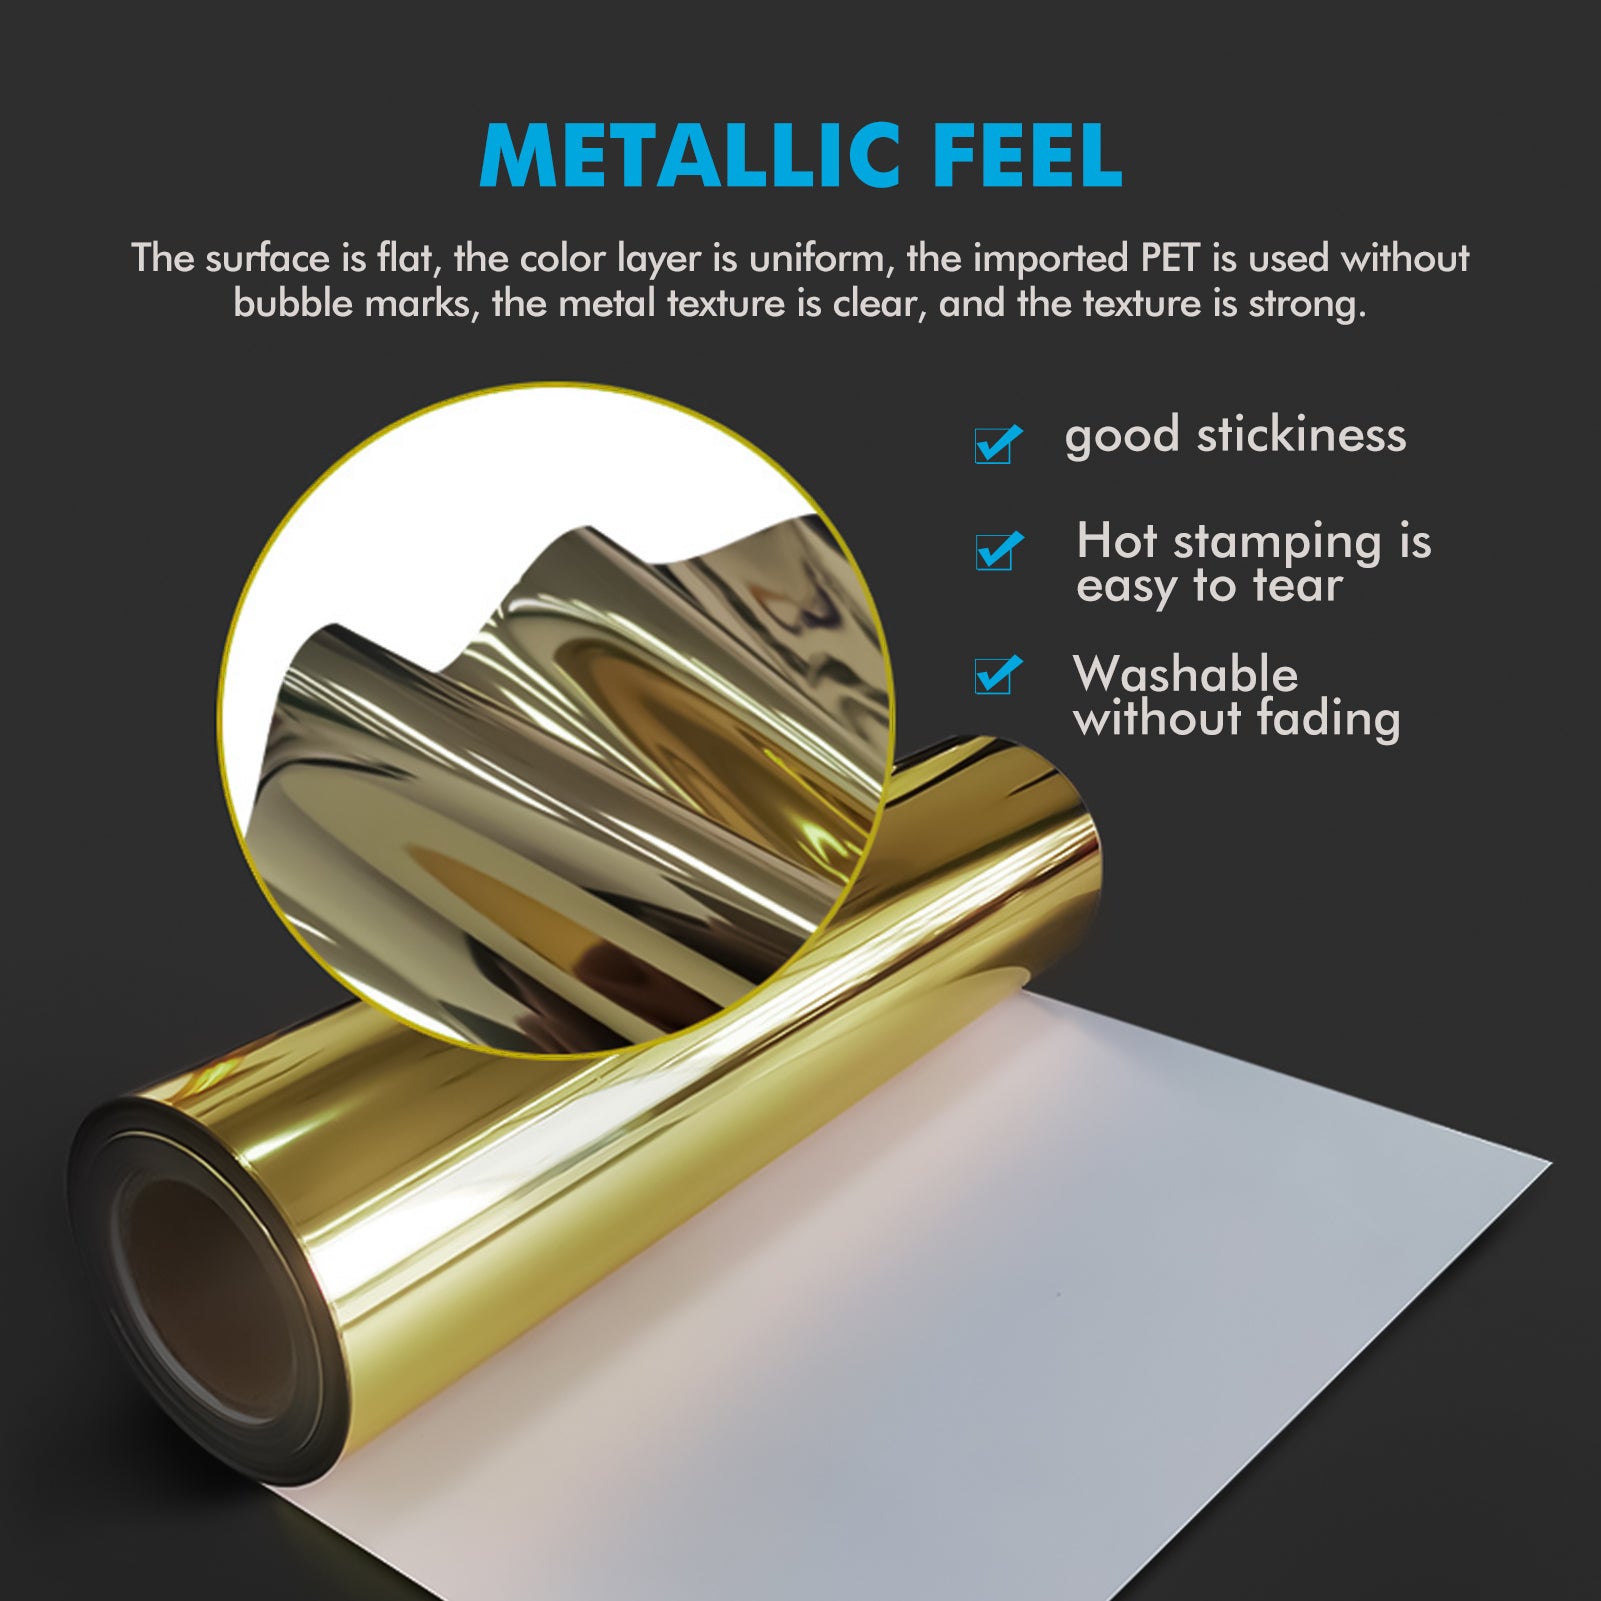 A roll of shiny gold metallic foil is displayed against a dark background. Text at the top reads "METALLIC FEEL" with a description underneath, and three checkmarks highlight benefits: "good stickiness," "Hot stamping is easy to tear," and "Washable without fading." Perfect for use with your CrealityFalcon 10pcs HTV Heat Transfer Vinyl Paper for Falcon Laser Engraving for precise designs.